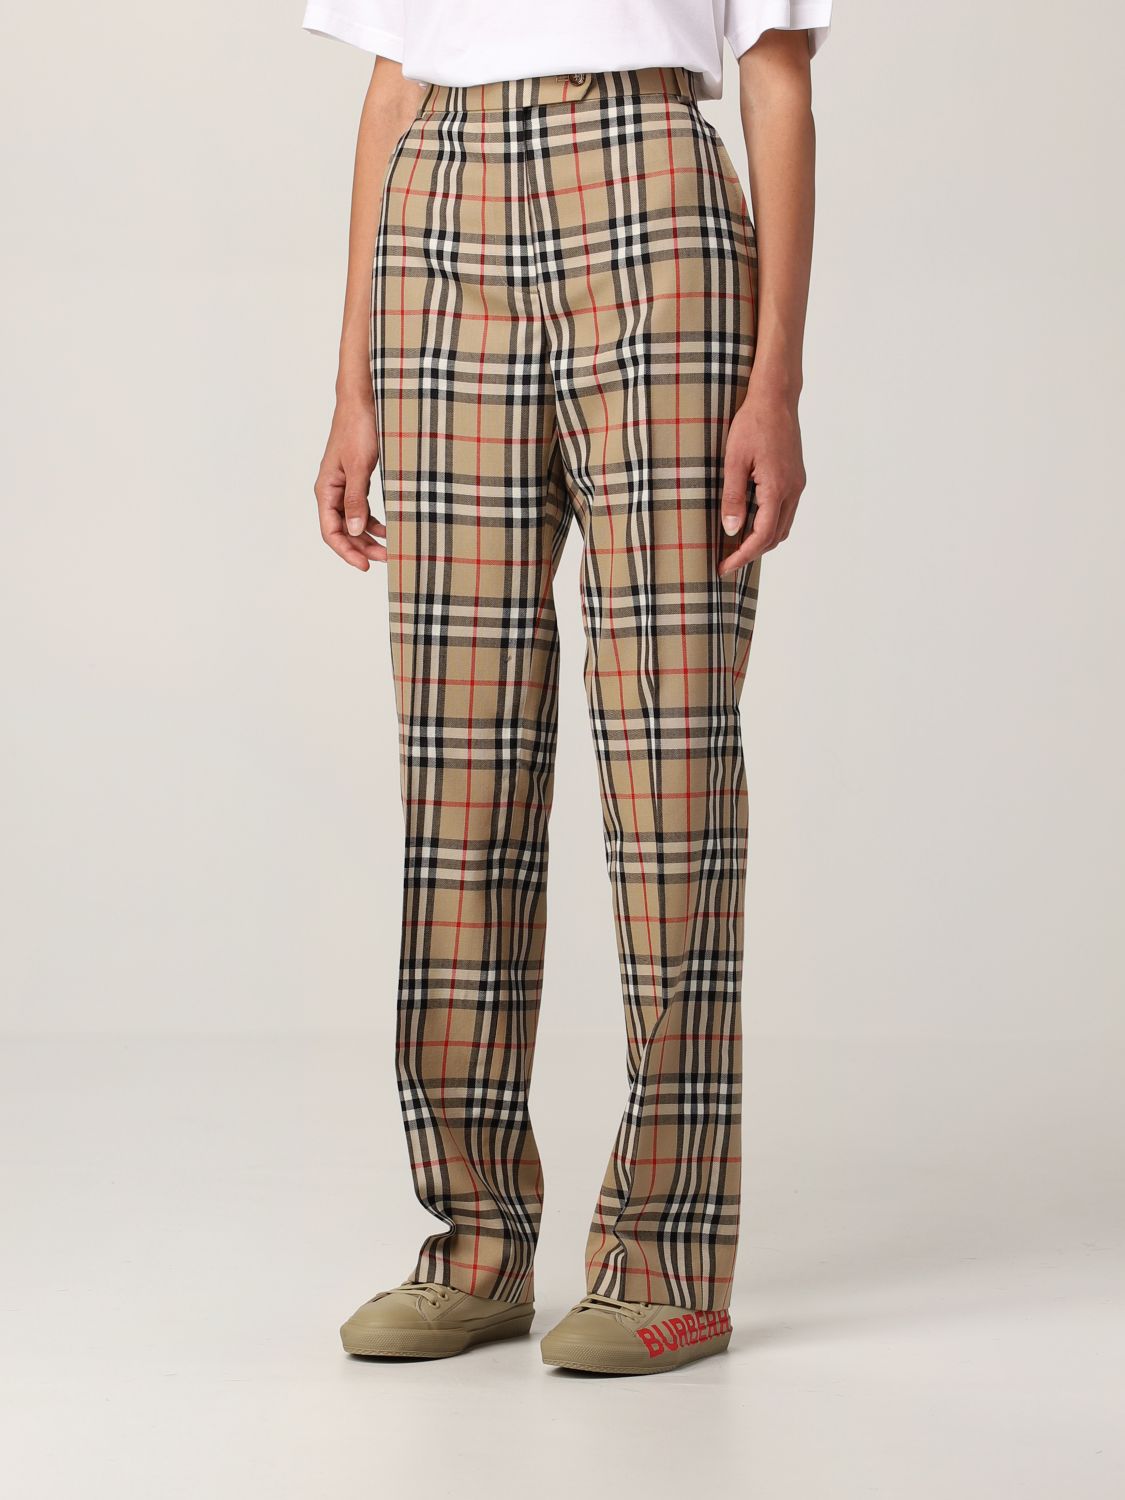 Burberry Vintage Check Trousers